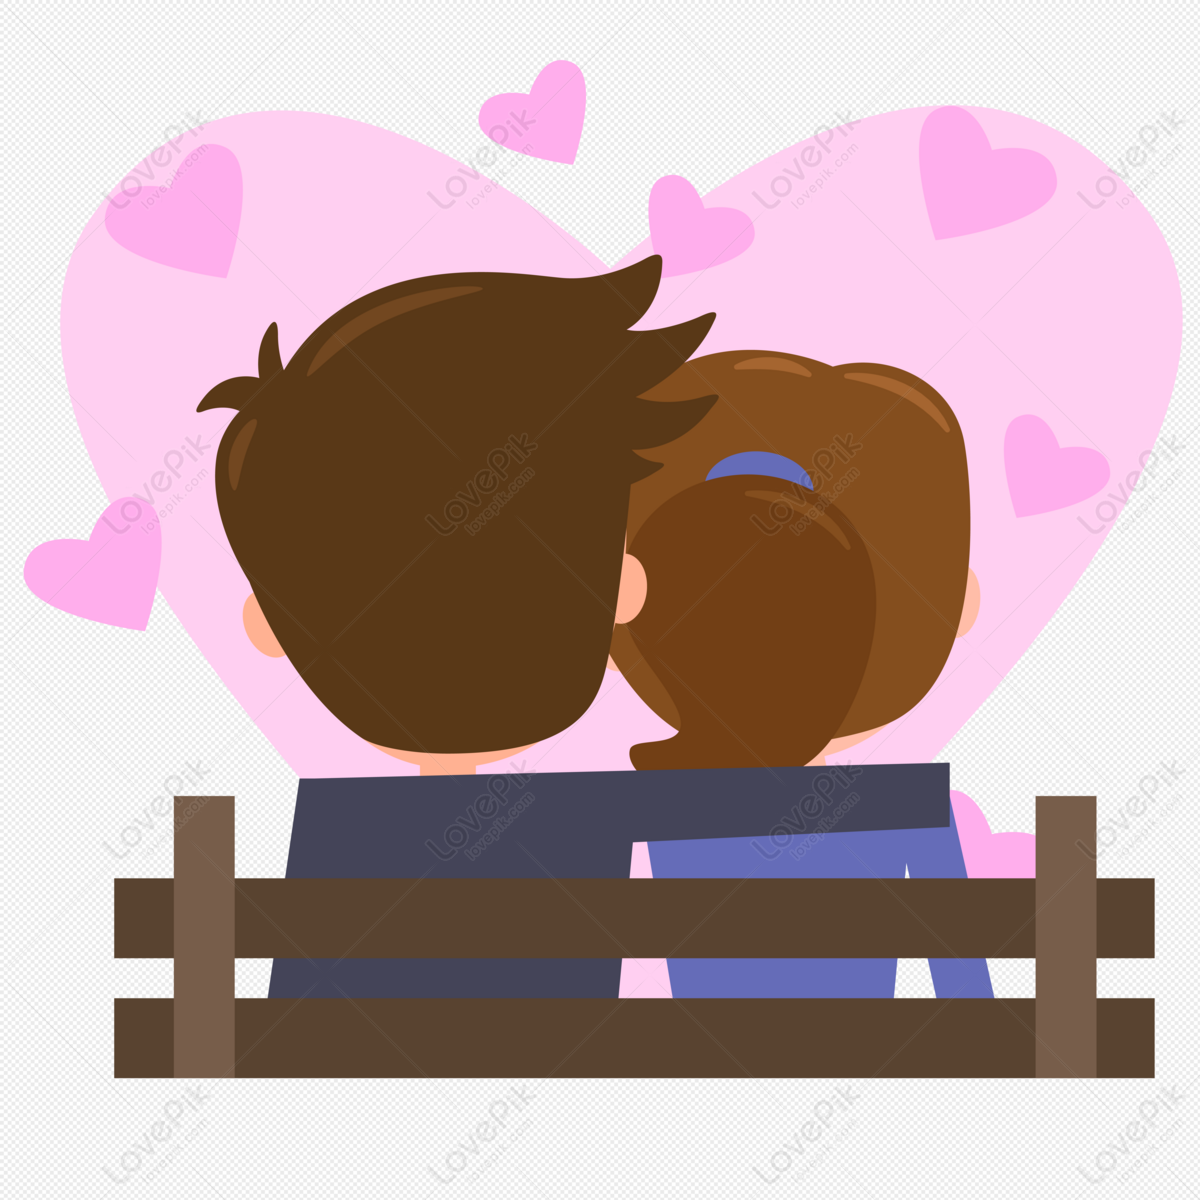 The Back Shadow Elements Of Lovers In Cartoon Cute Dating Free PNG And  Clipart Image For Free Download - Lovepik | 400951419